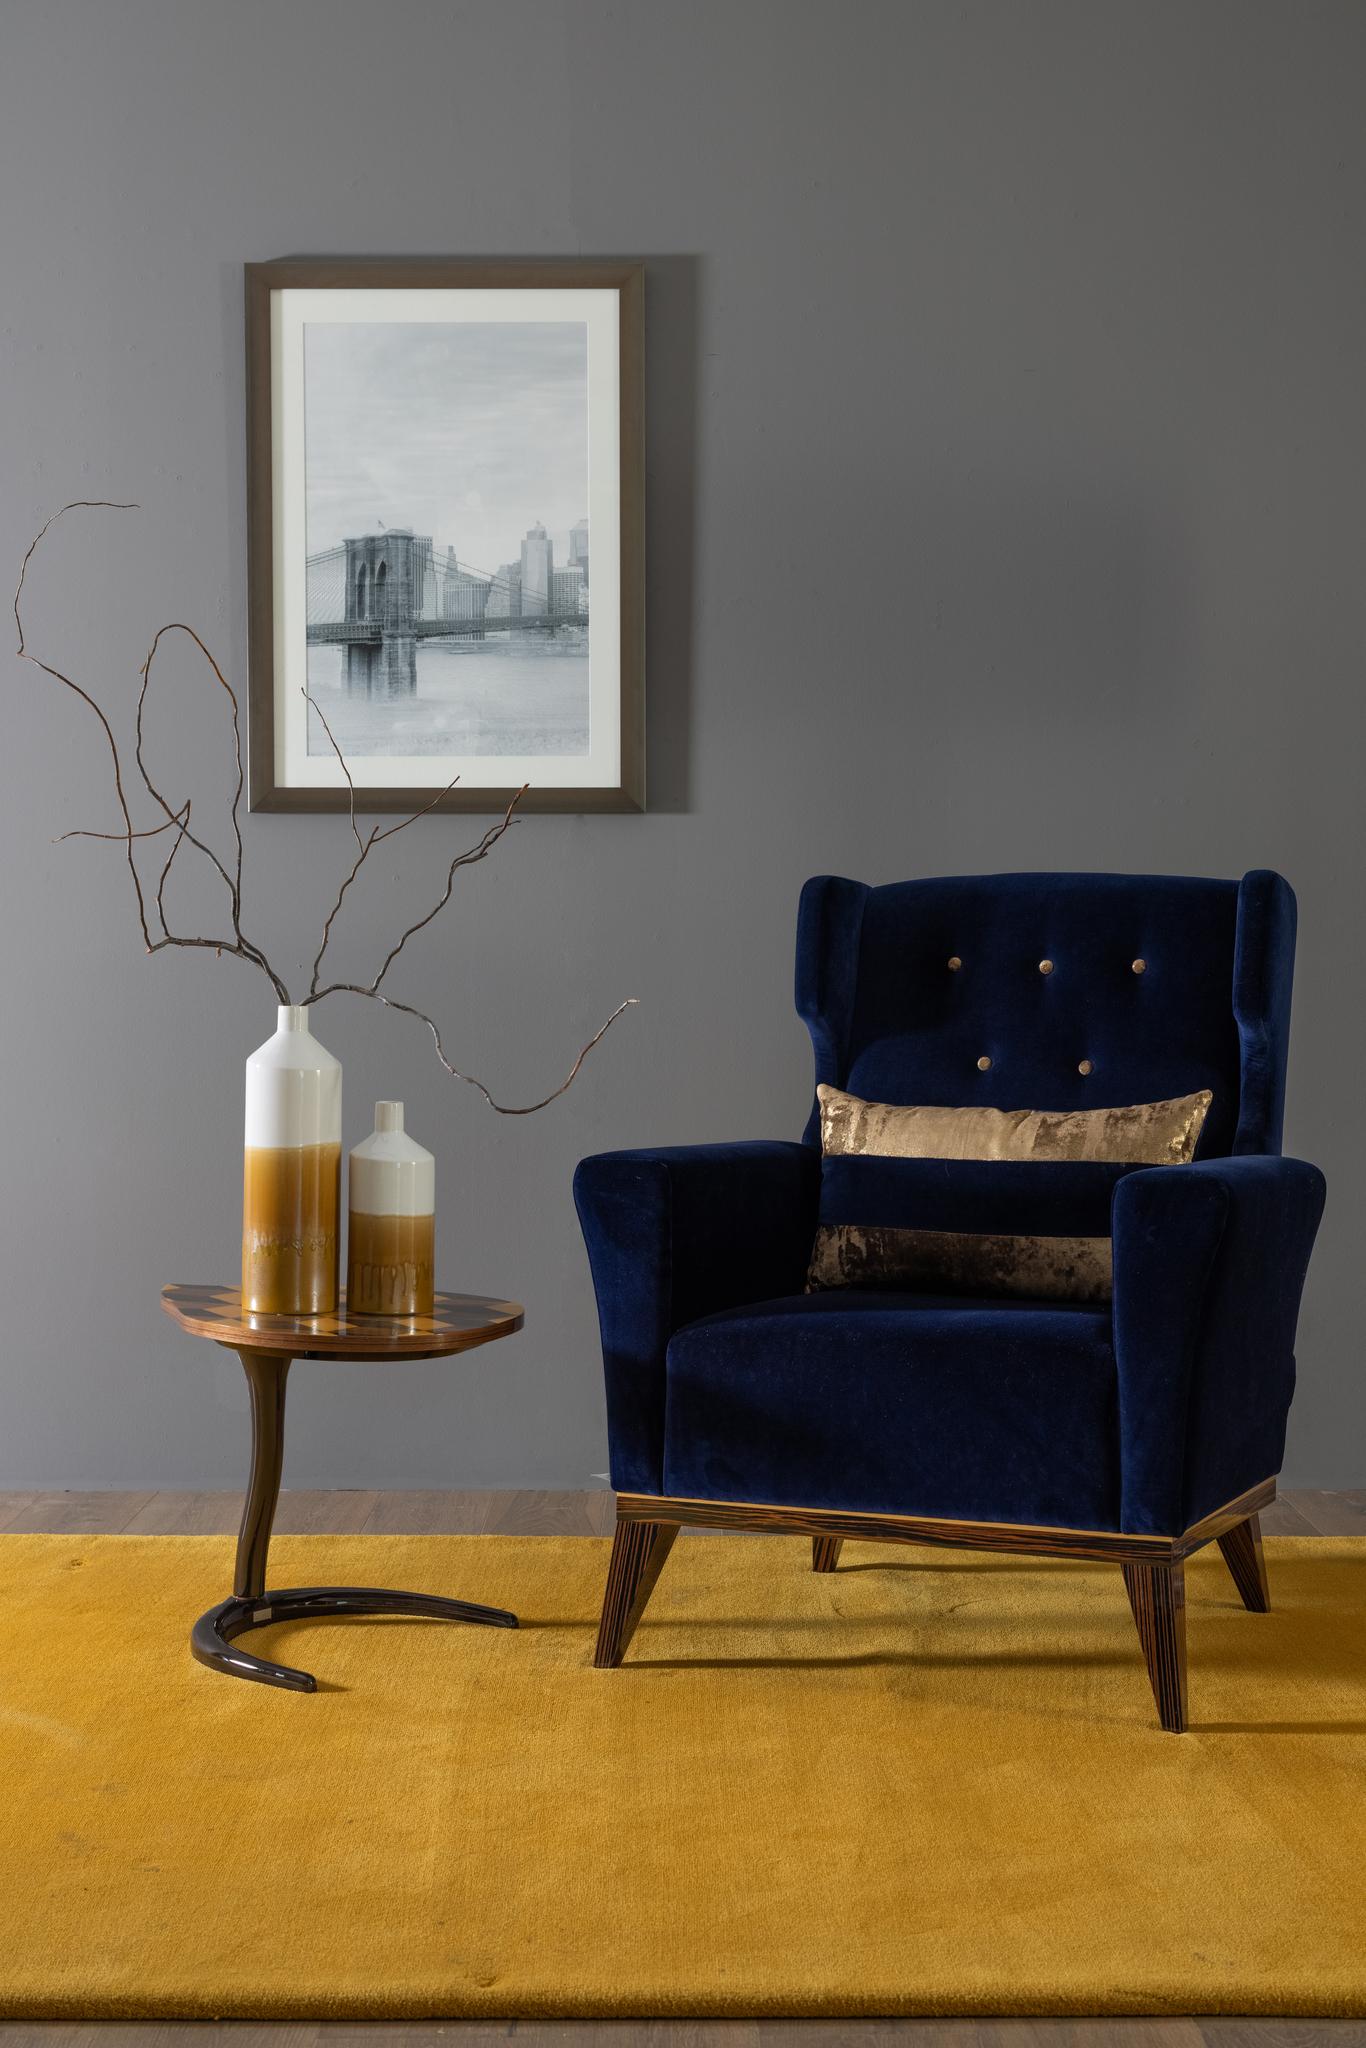 Genebra armchair, Modern Collection, Handcrafted in Portugal - Europe by GF Modern.

The Genebra armchair is designed to give your living room a sophisticated vintage look. The armchair is upholstered in dark blue velvet and lacquered with